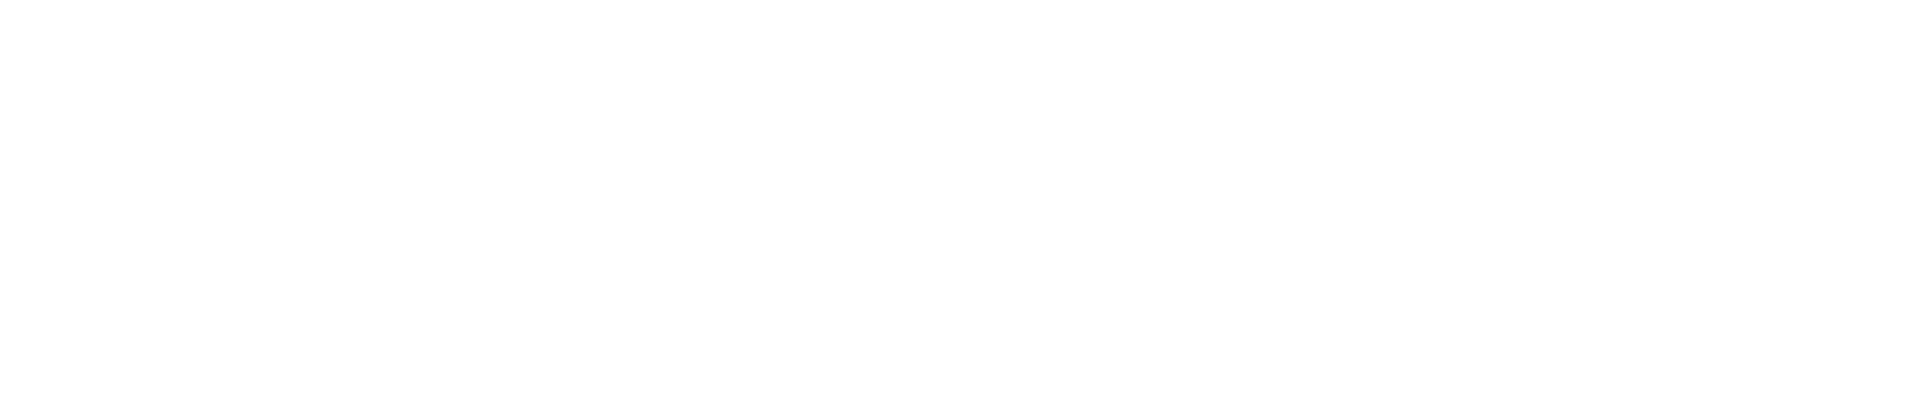 cup of tea guesthouse logo